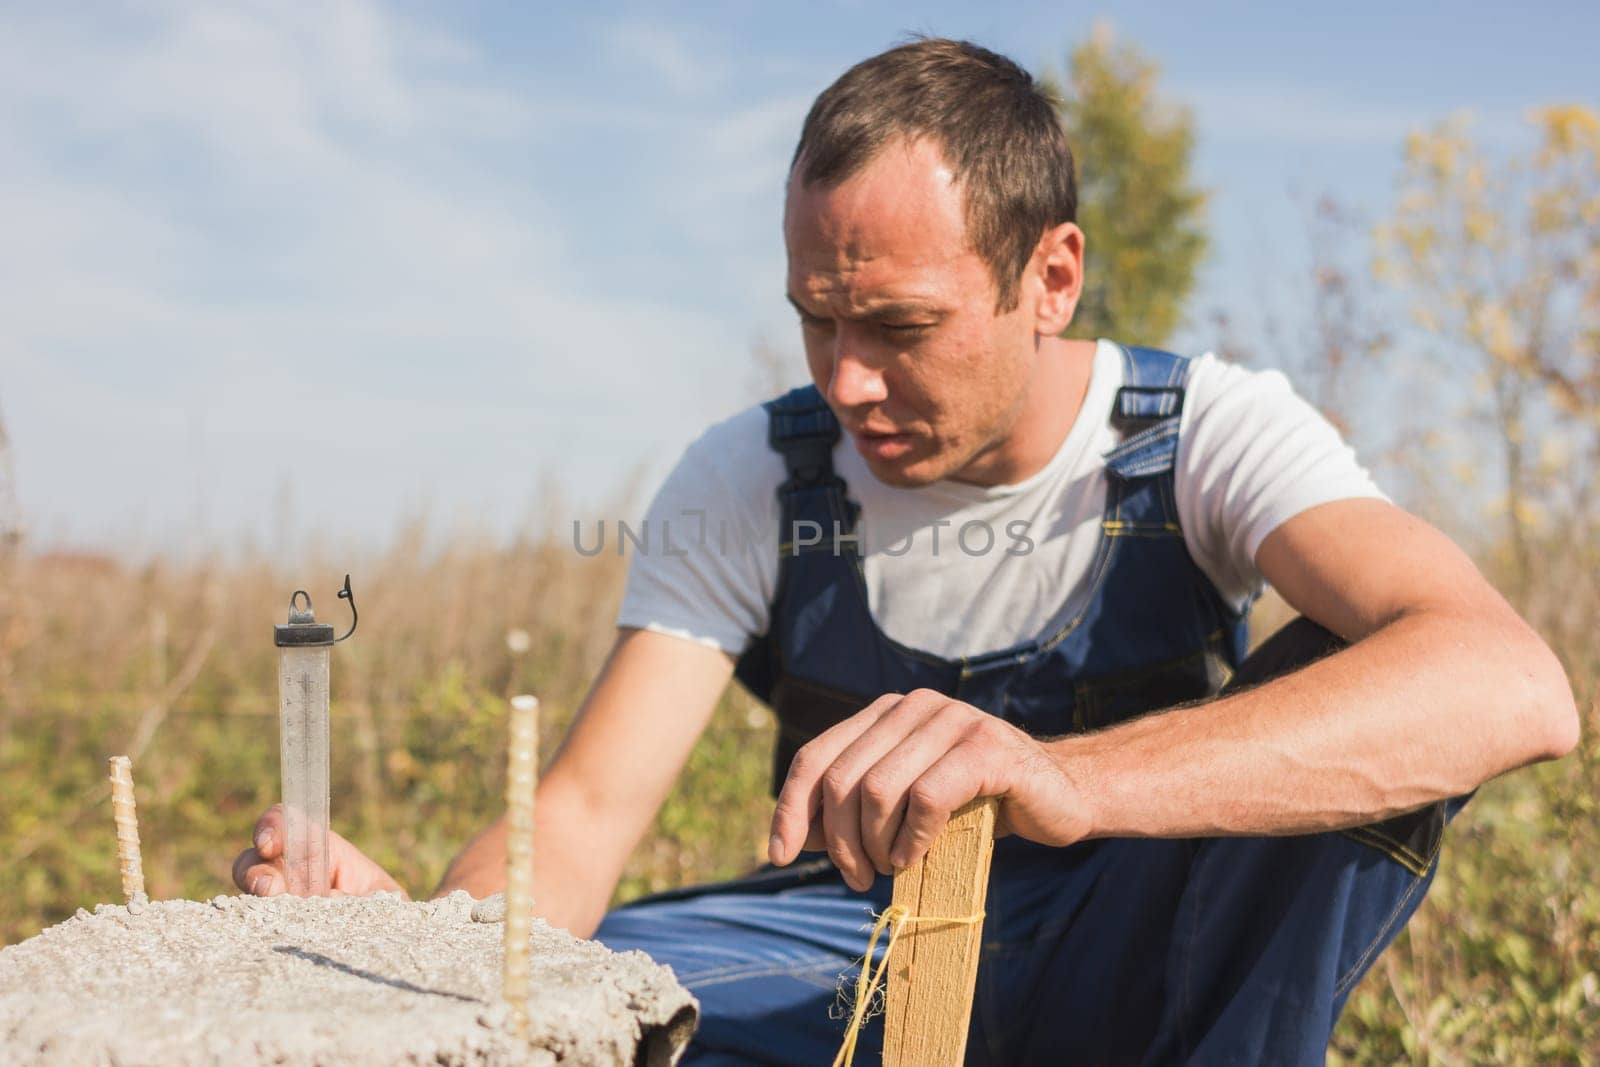 Worker builder in jumpsuit working outdoors, portrait by Studia72